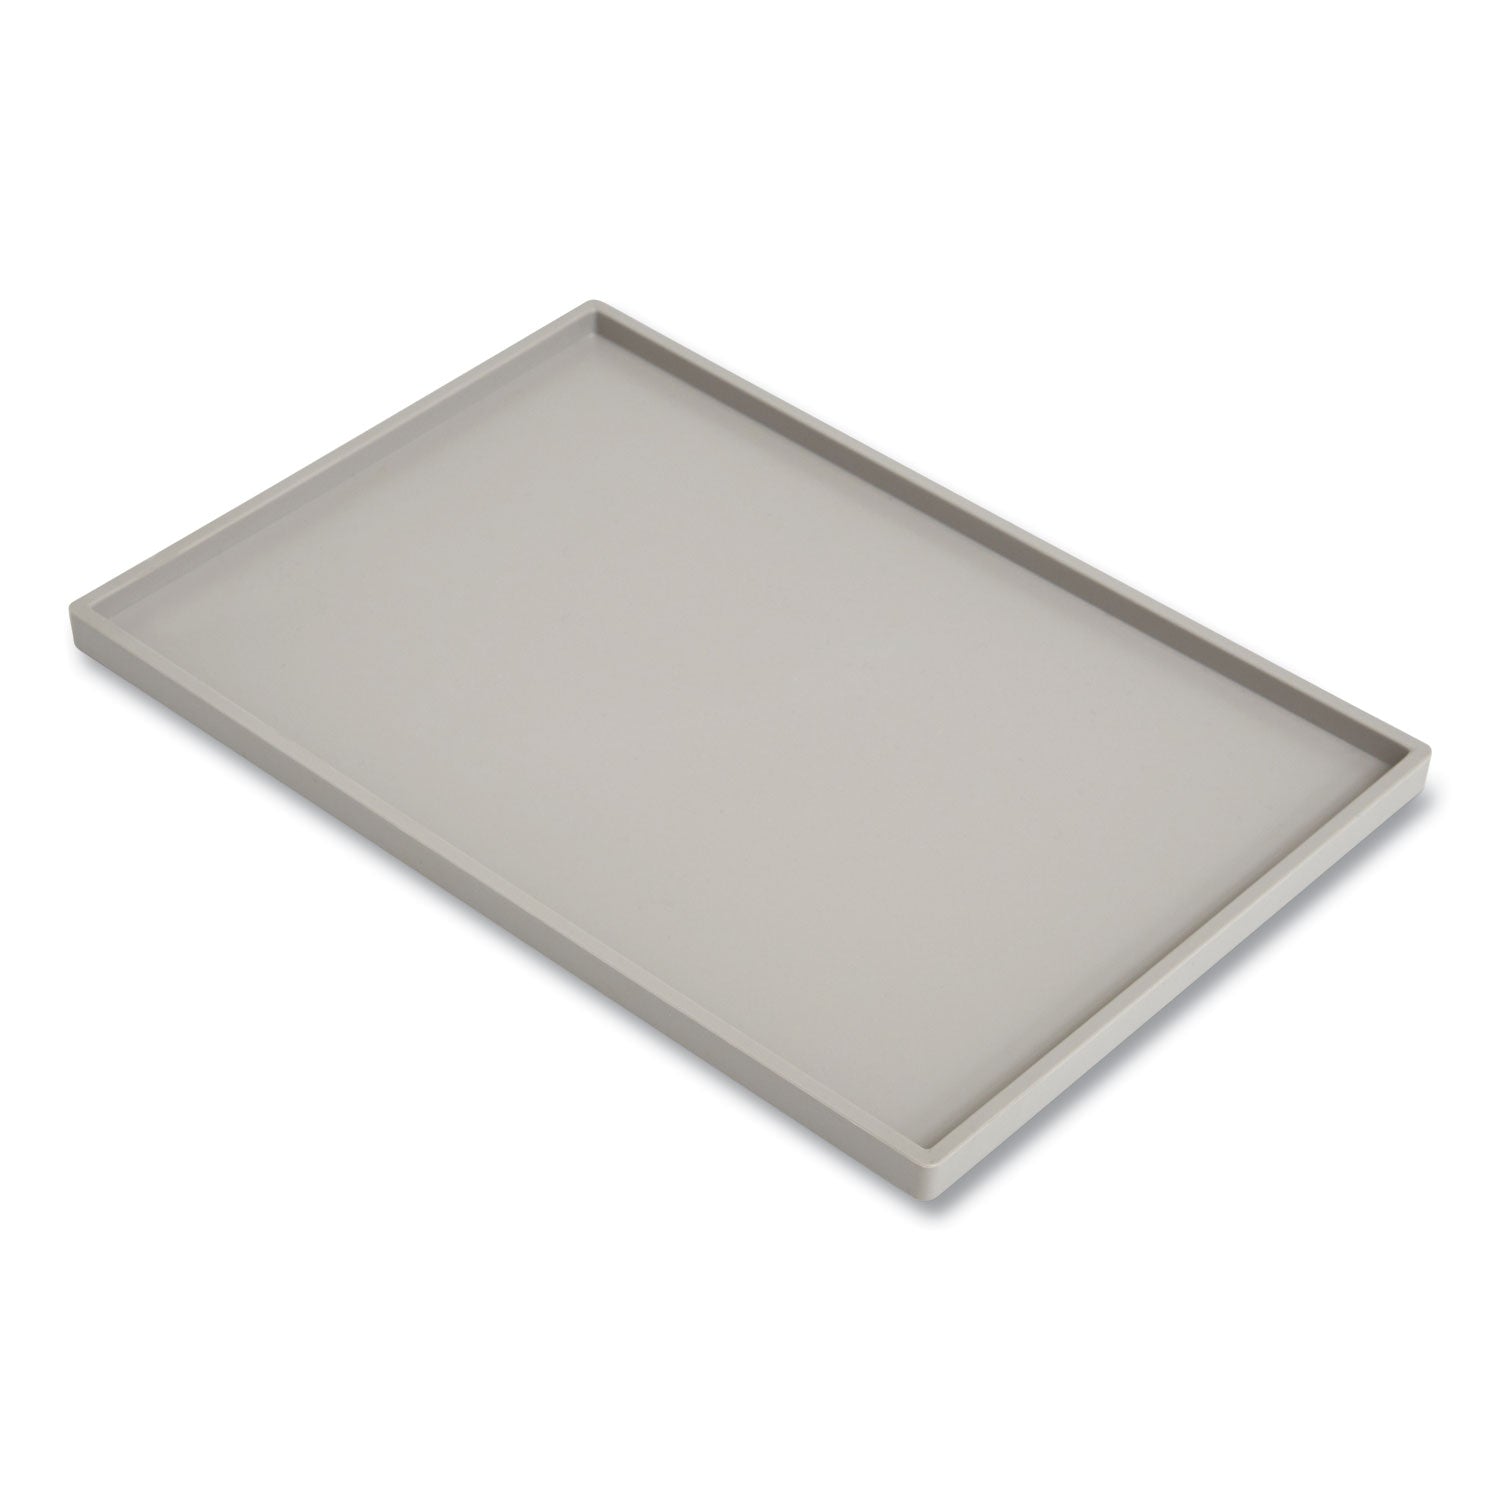 slim-stackable-plastic-mail-and-supplies-tray-1-section-#6-1-4-to-#16-envelopes-685-x-988-x-047-gray_tud24380419 - 3